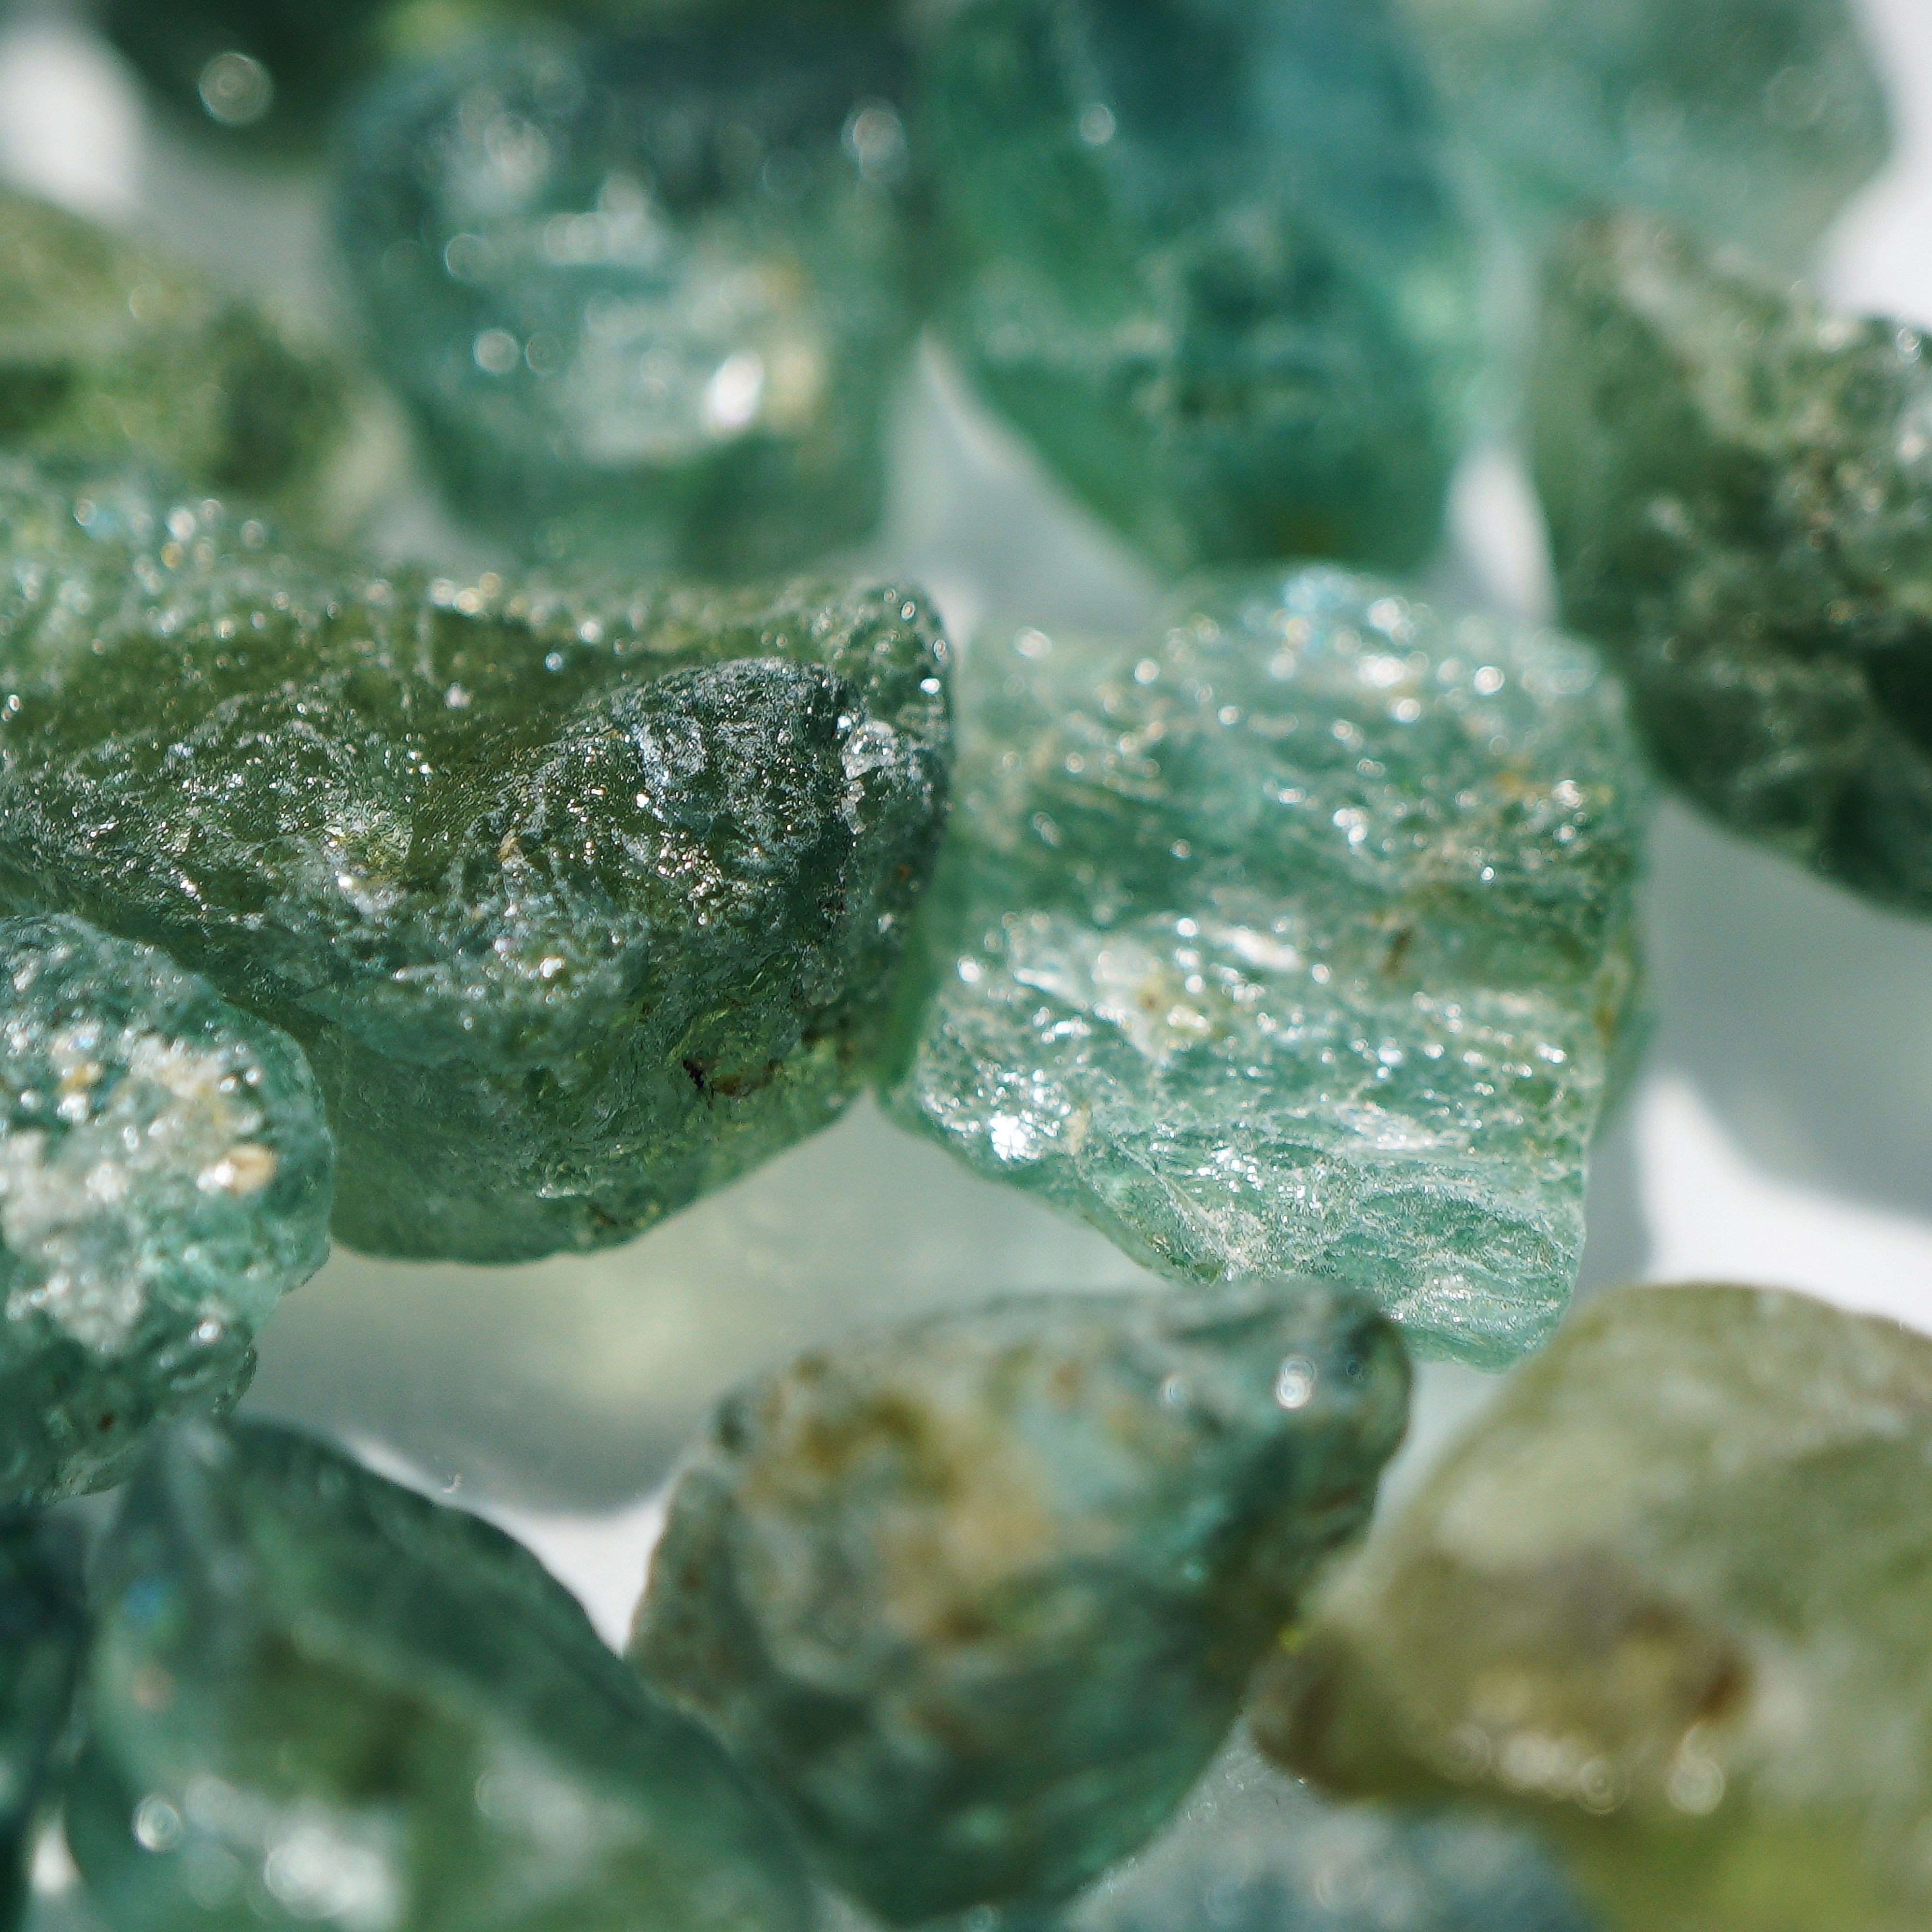 50G Blue Green Apatite Lots From Tanzania Blind Pour 0.2Gm - 3Gm- Buy As Much You Like